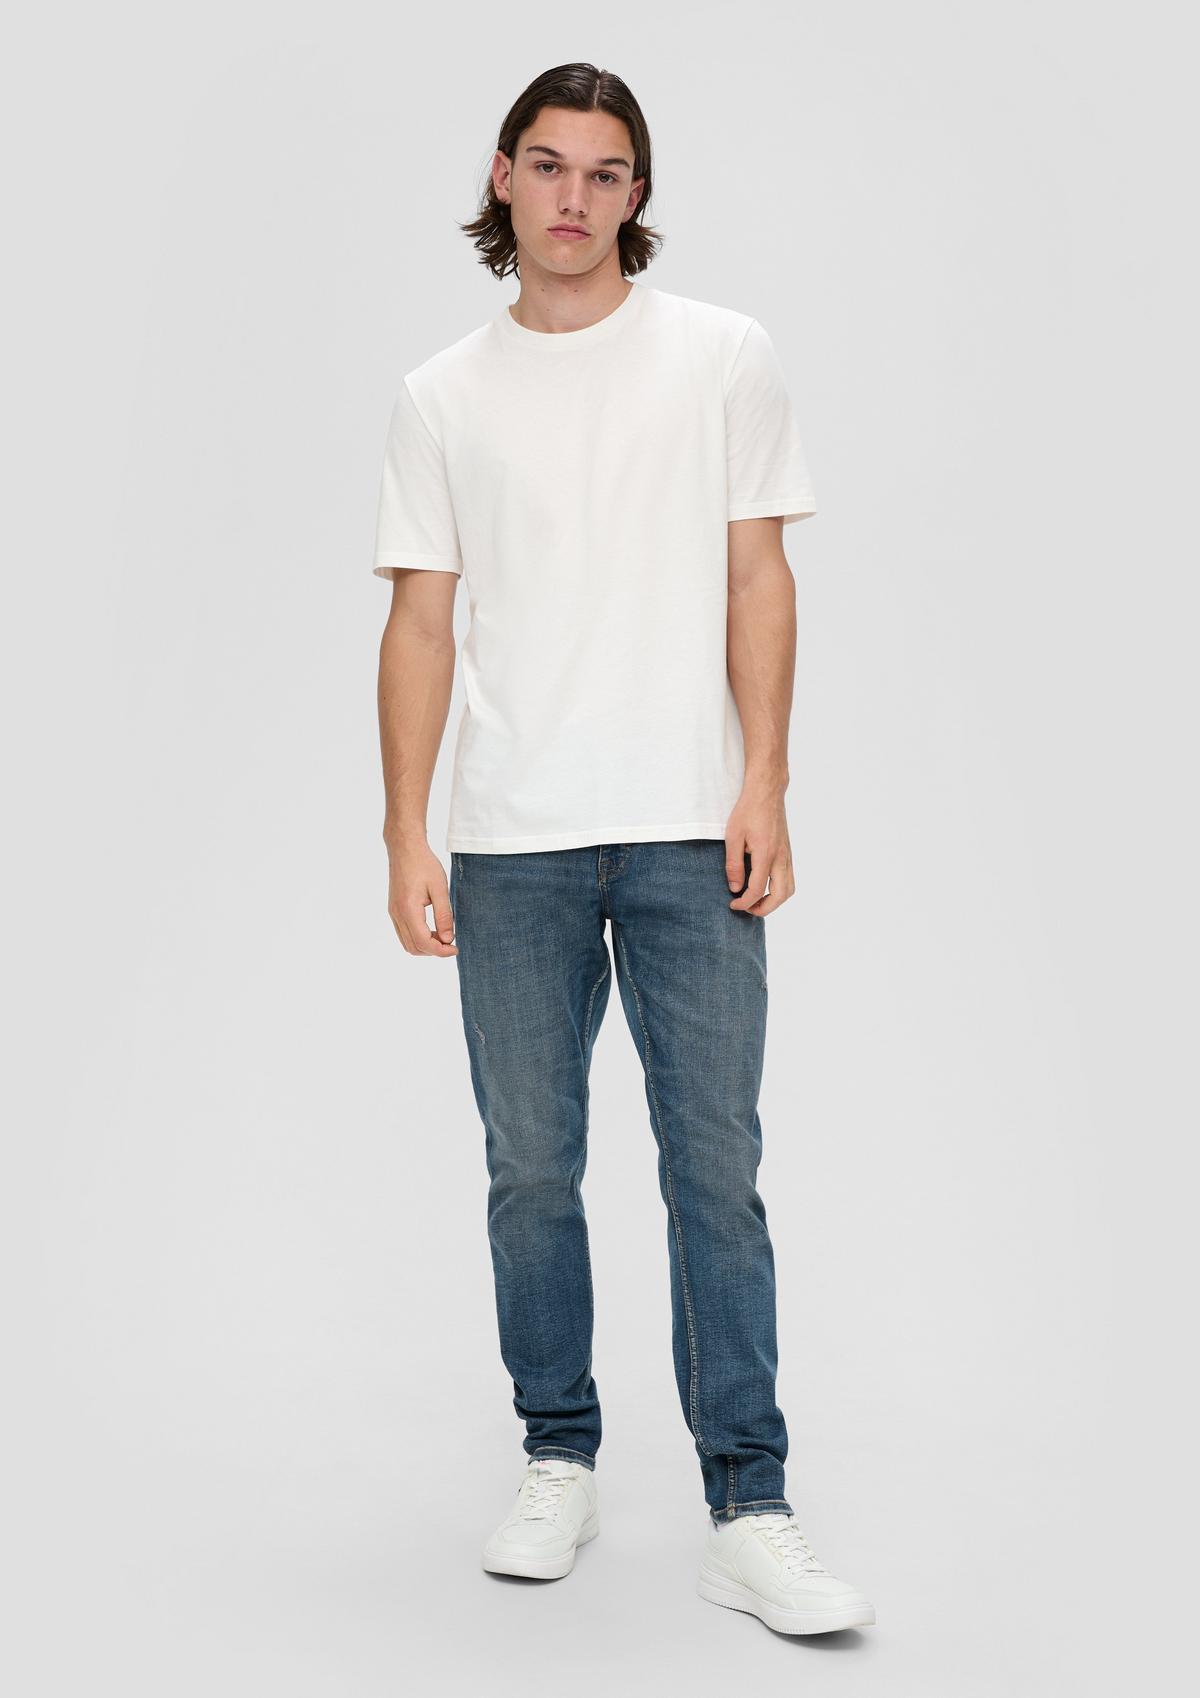 Shawn jeans / regular fit / mid rise / tapered leg